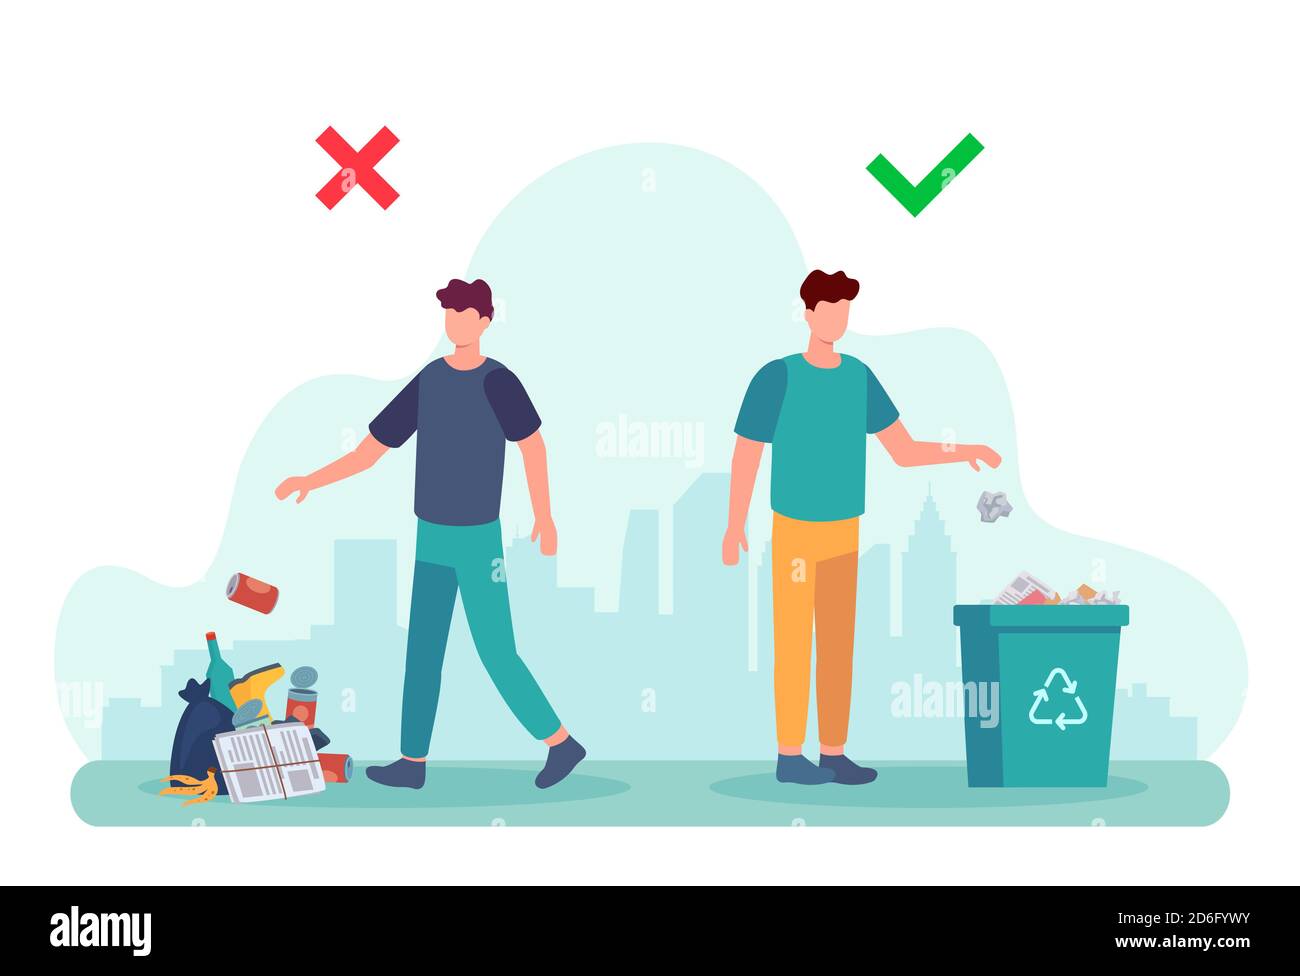 Littering behavior. Infographic of correct and wrong examples of throwing out garbage. Illustration of man disposing trash in container Stock Vector